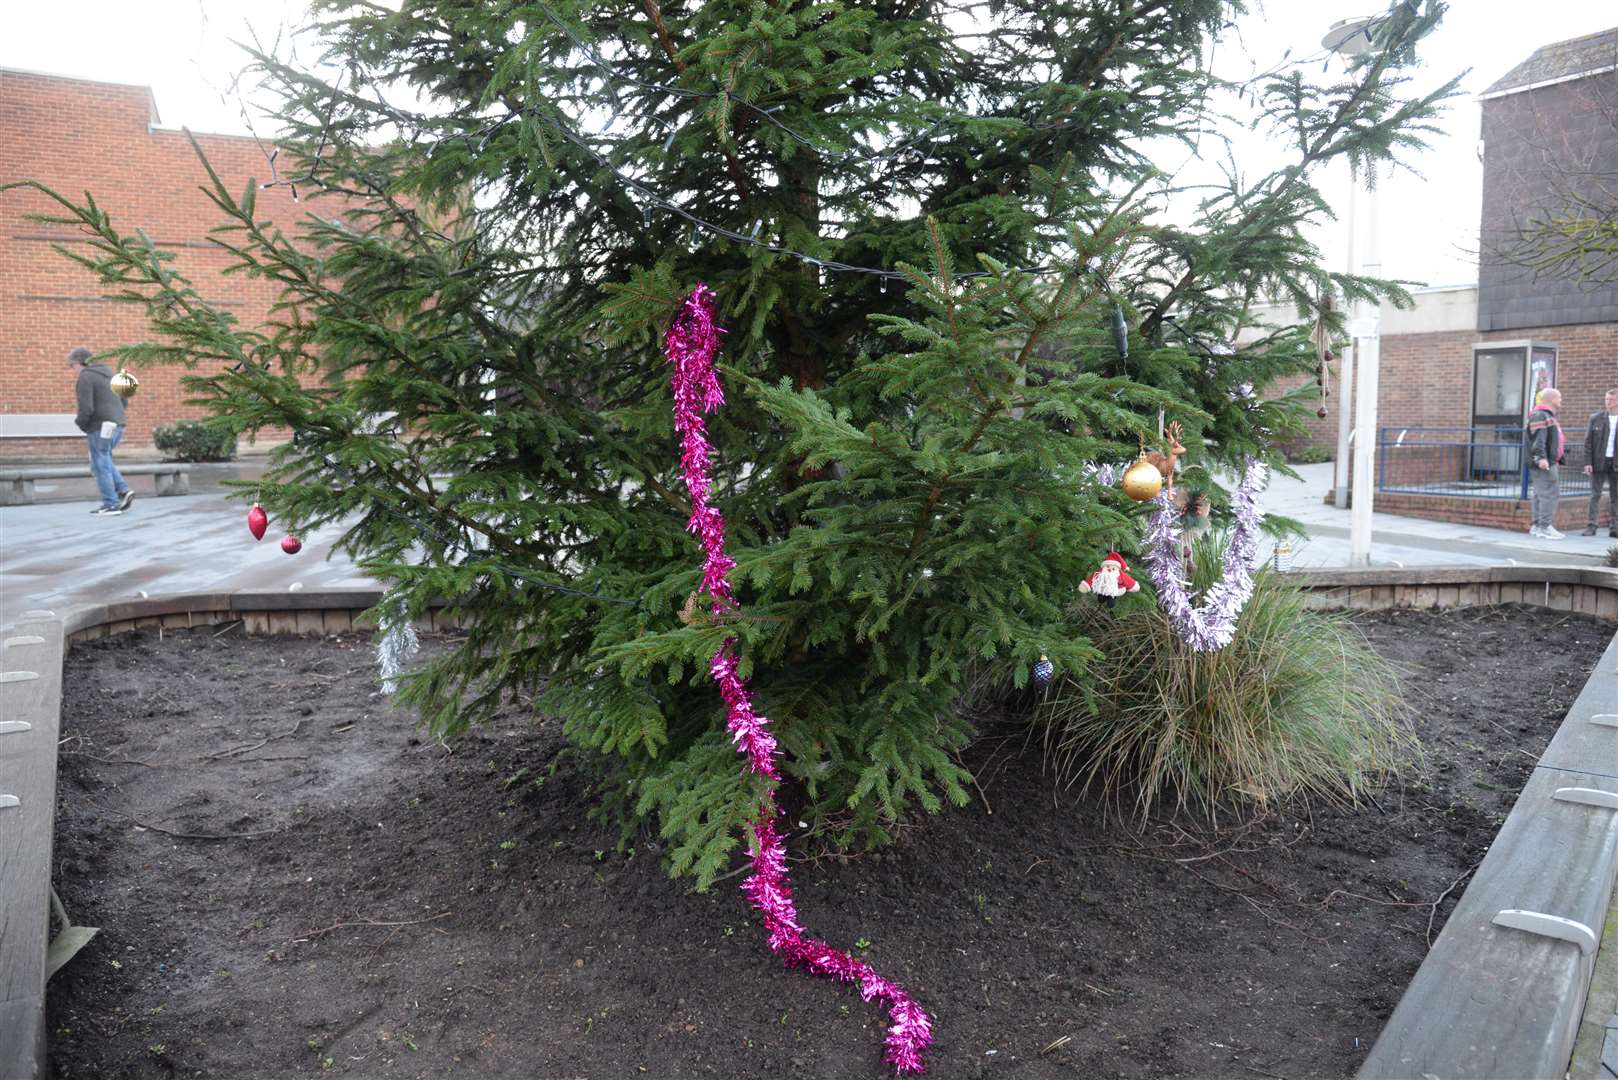 The Strood Christmas Tree. Picture: Chris Davey. (6205043)